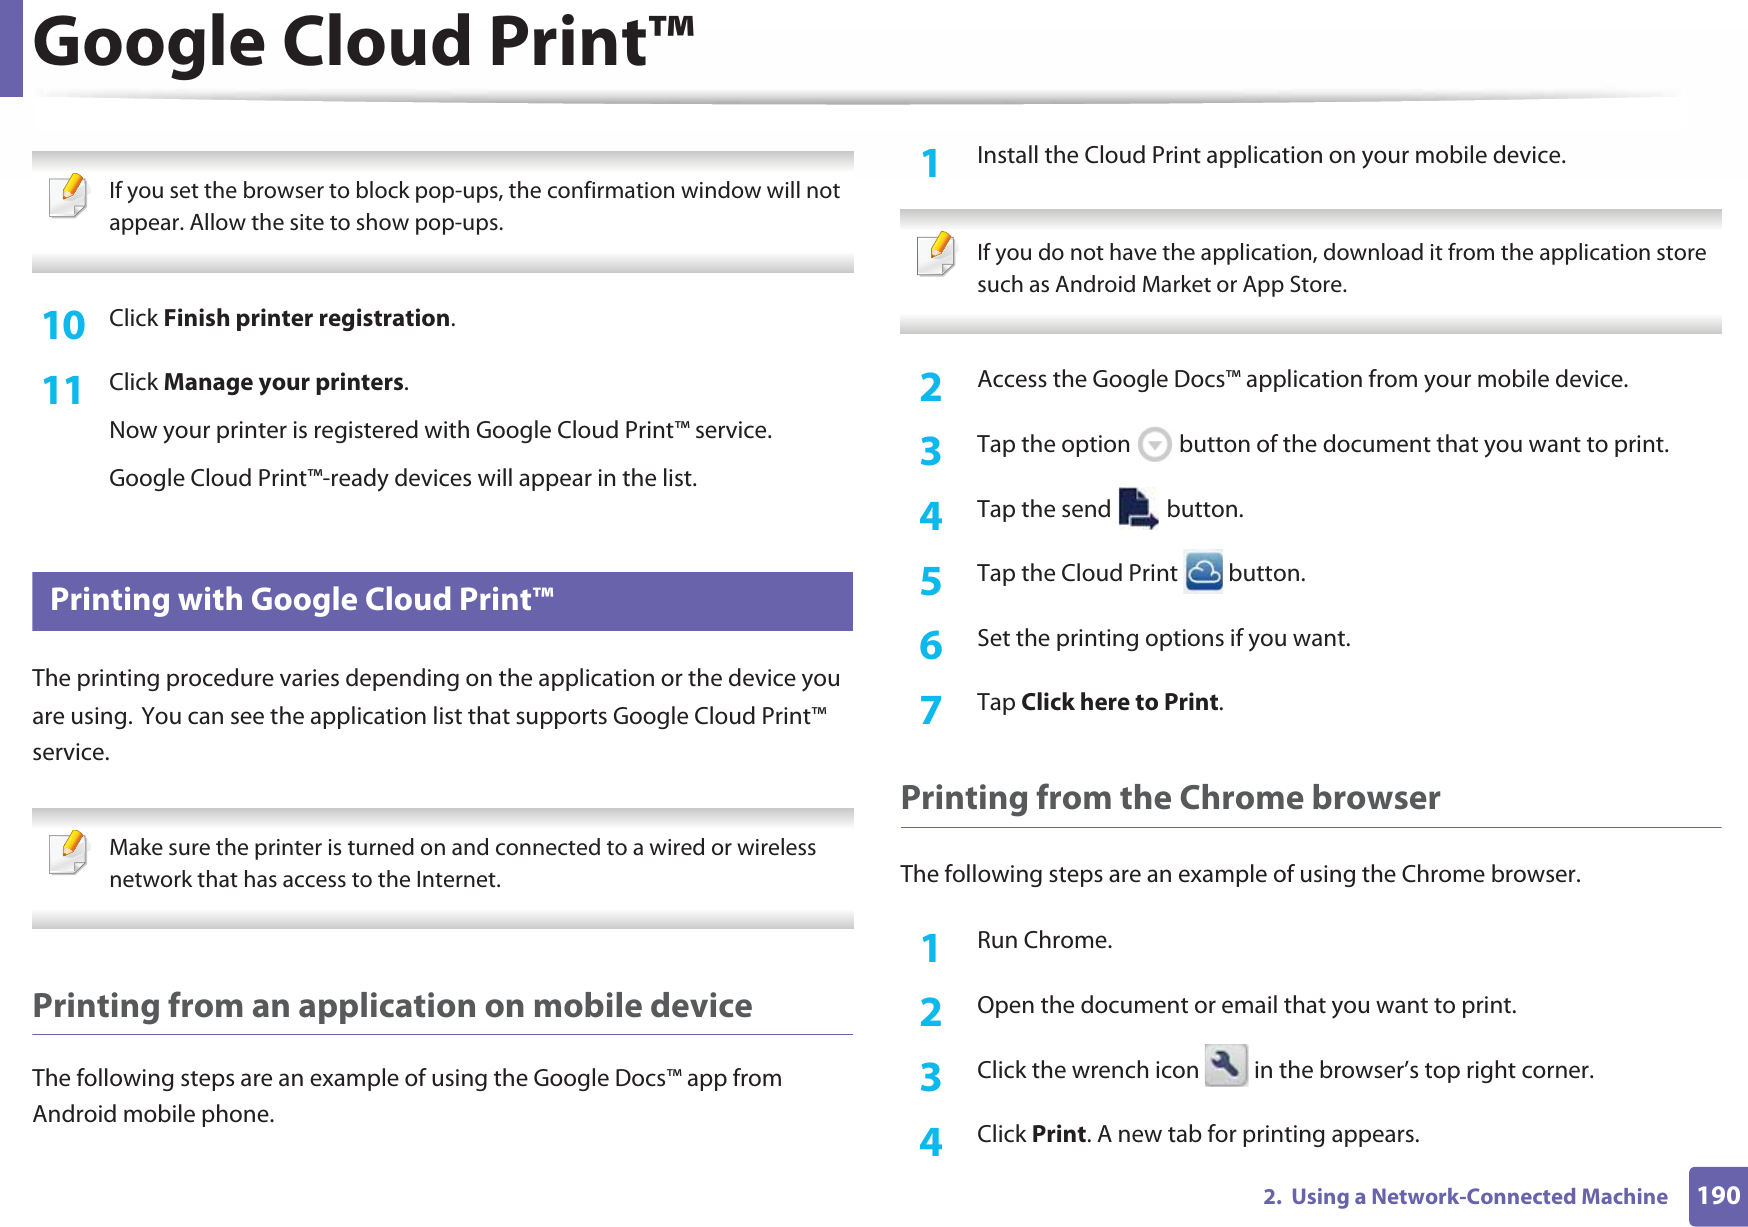 Google Cloud Print™1902.  Using a Network-Connected Machine If you set the browser to block pop-ups, the confirmation window will not appear. Allow the site to show pop-ups.  10  Click Finish printer registration.11  Click Manage your printers.Now your printer is registered with Google Cloud Print™ service.Google Cloud Print™-ready devices will appear in the list.29 Printing with Google Cloud Print™The printing procedure varies depending on the application or the device you are using.GYou can see the application list that supports Google Cloud Print™ service. Make sure the printer is turned on and connected to a wired or wireless network that has access to the Internet.  Printing from an application on mobile deviceThe following steps are an example of using the Google Docs™ app from Android mobile phone.1Install the Cloud Print application on your mobile device.  If you do not have the application, download it from the application storeGsuch as Android Market or App Store.  2  Access the Google Docs™ application from your mobile device. 3  Tap the option   button of the document that you want to print.4  Tap the send   button.5  Tap the Cloud Print   button.6  Set the printing options if you want.7  Tap Click here to Print.Printing from the Chrome browserThe following steps are an example of using the Chrome browser.1Run Chrome.2  Open the document or email that you want to print.3  Click the wrench icon   in the browser’s top right corner.4  Click Print. A new tab for printing appears.